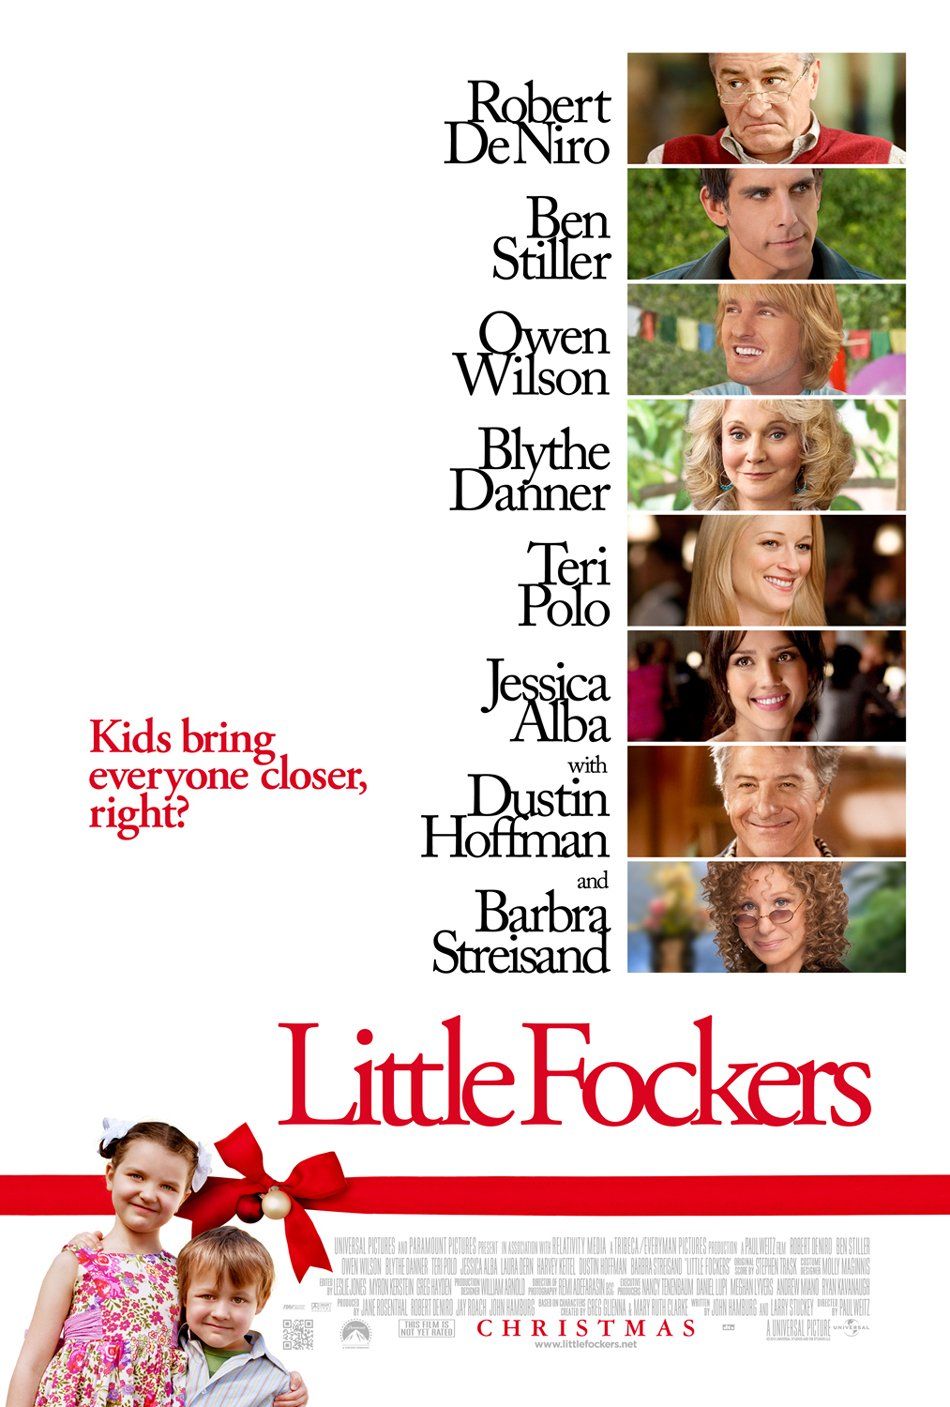 Little Fockers U.S. theatrical poster.